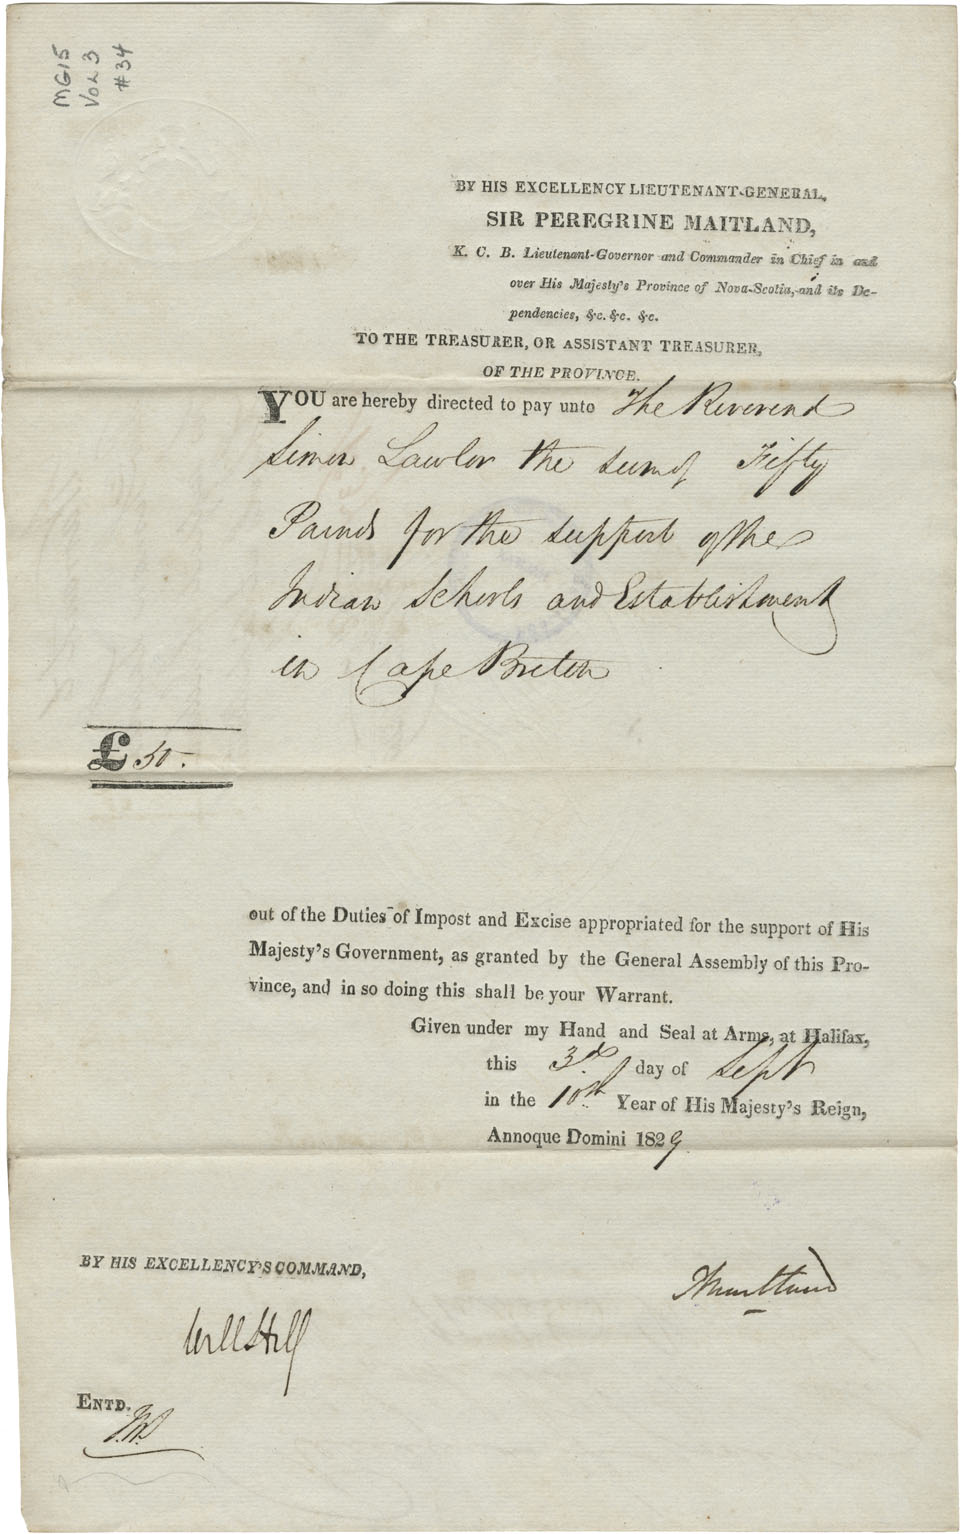 Sir Peregrine Maitland's order to the Provincial Treasurer, to pay the Rev. Simon Lawler £50-0-0 for the support of the 'Indian Schools' and establishments in Cape Breton. 